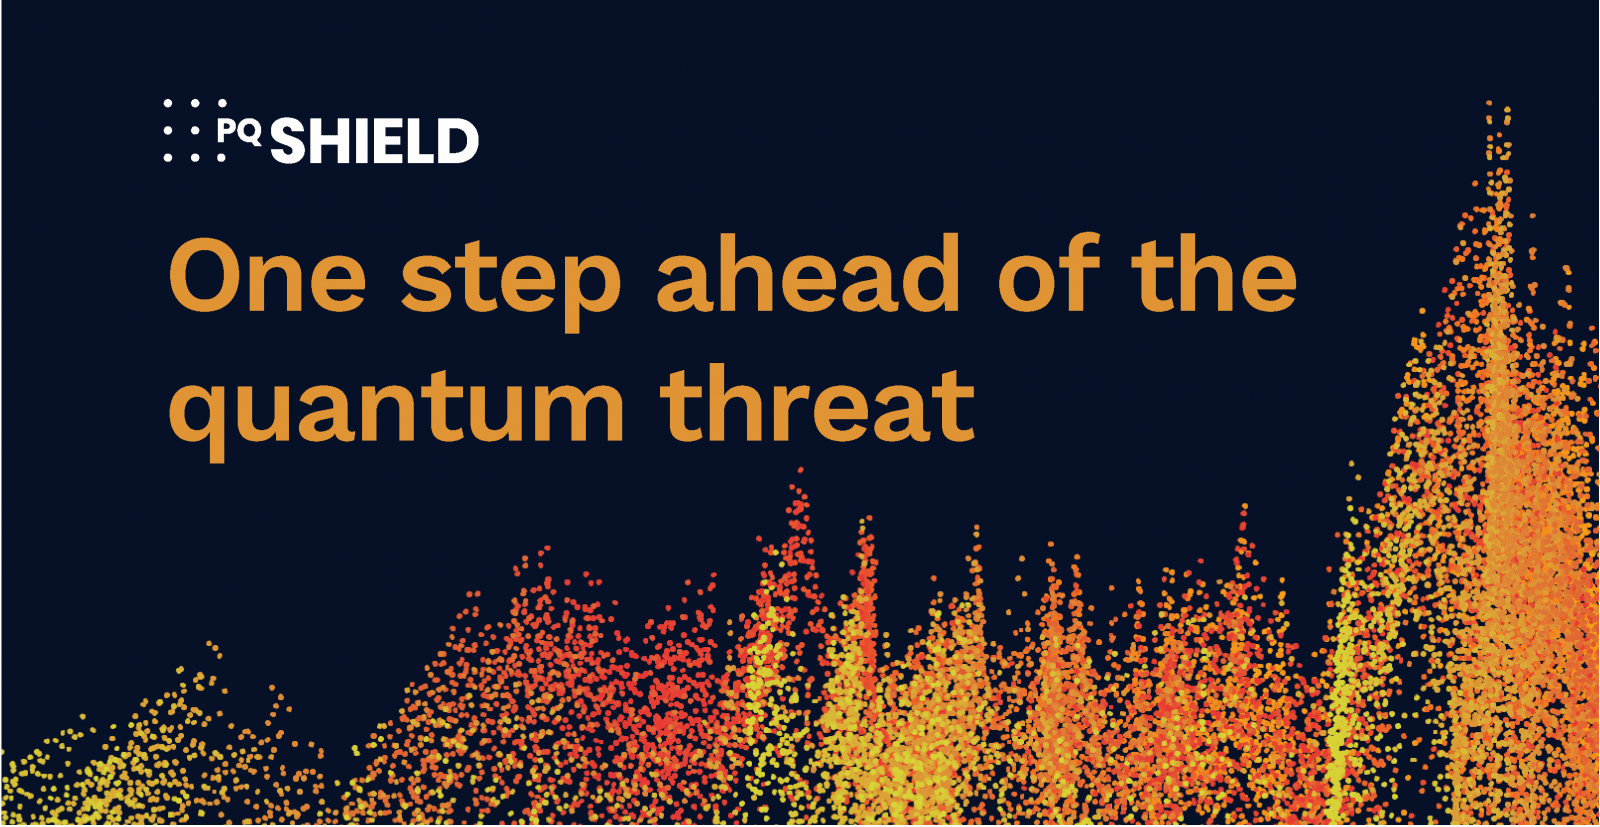 In a new self-written article, PQShield discusses their strategies to avoid quantum computing threats for cybersecurity.